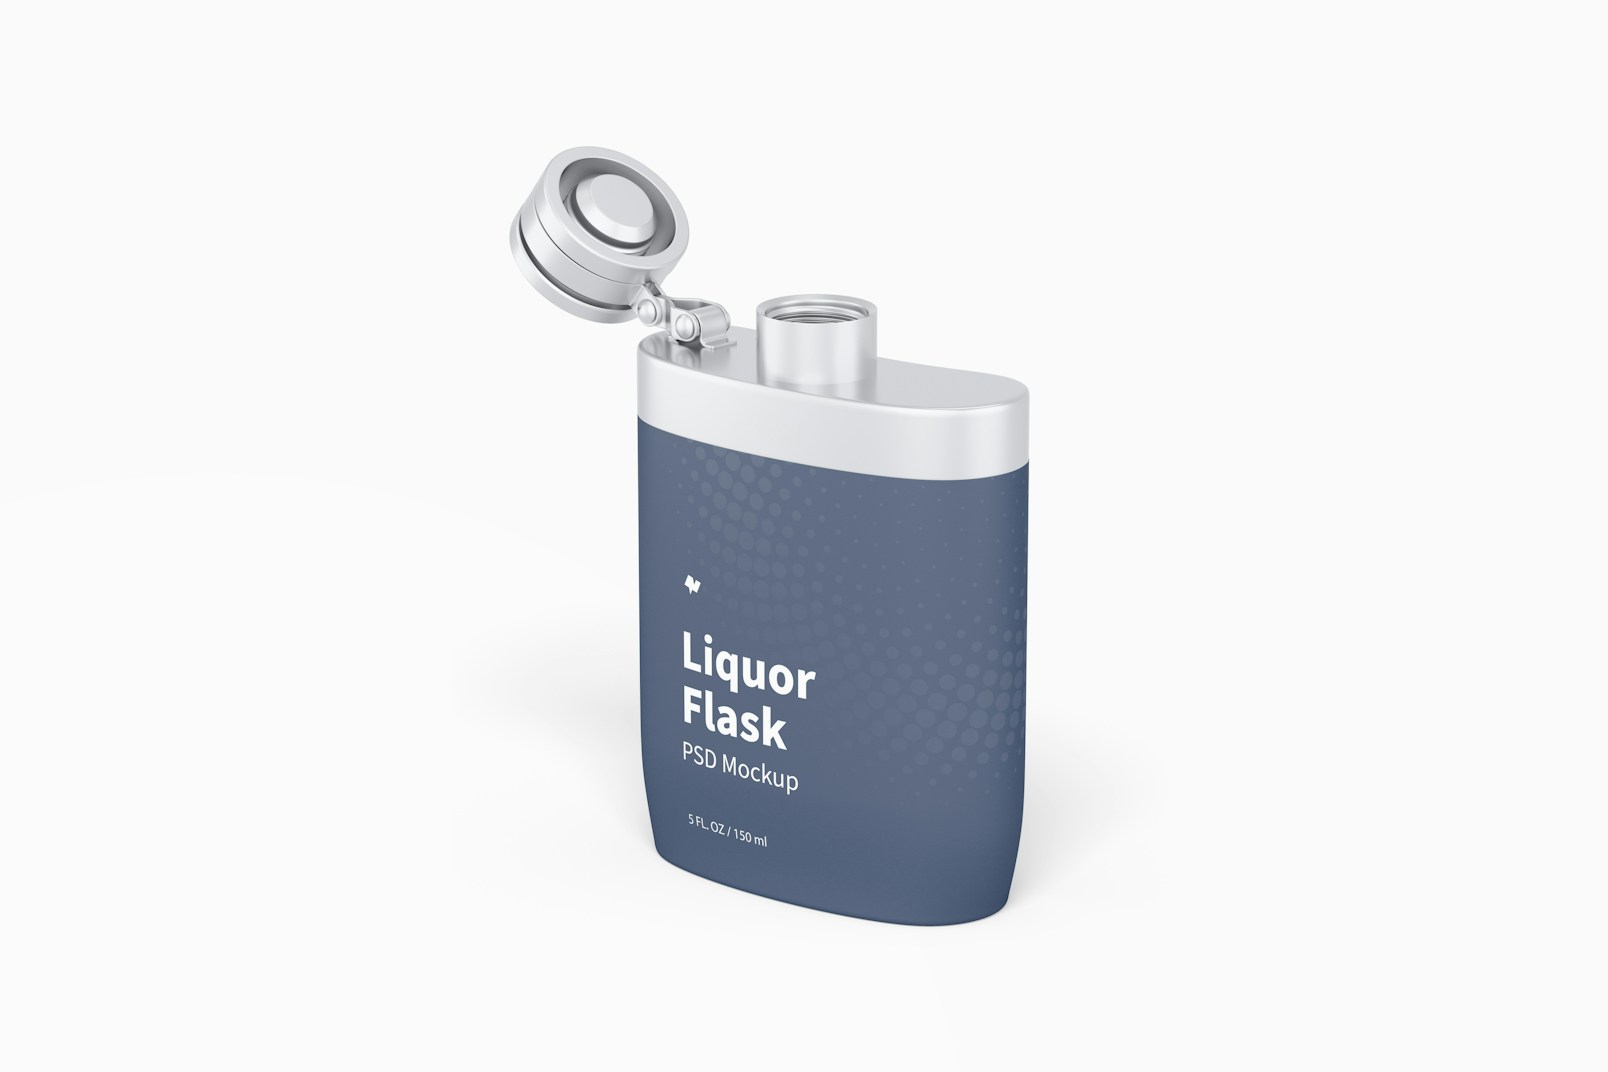 Liquor Flask With Plastic Wrap Mockup, Perspective